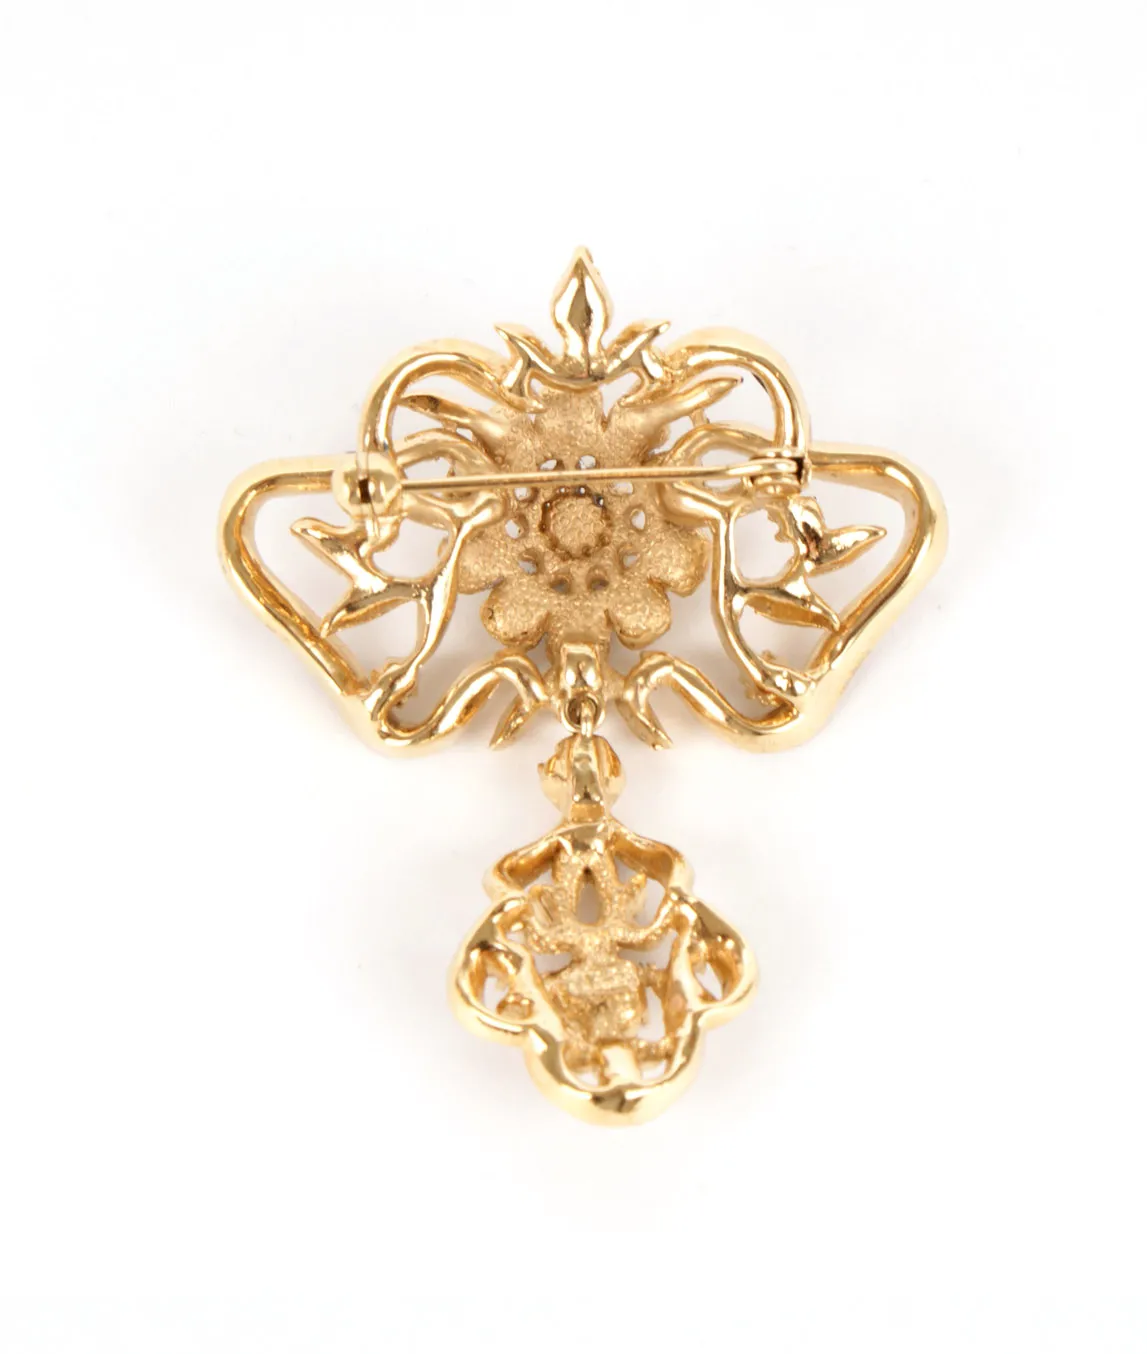 Gold plated reverse Attwood & Sawyer brooch